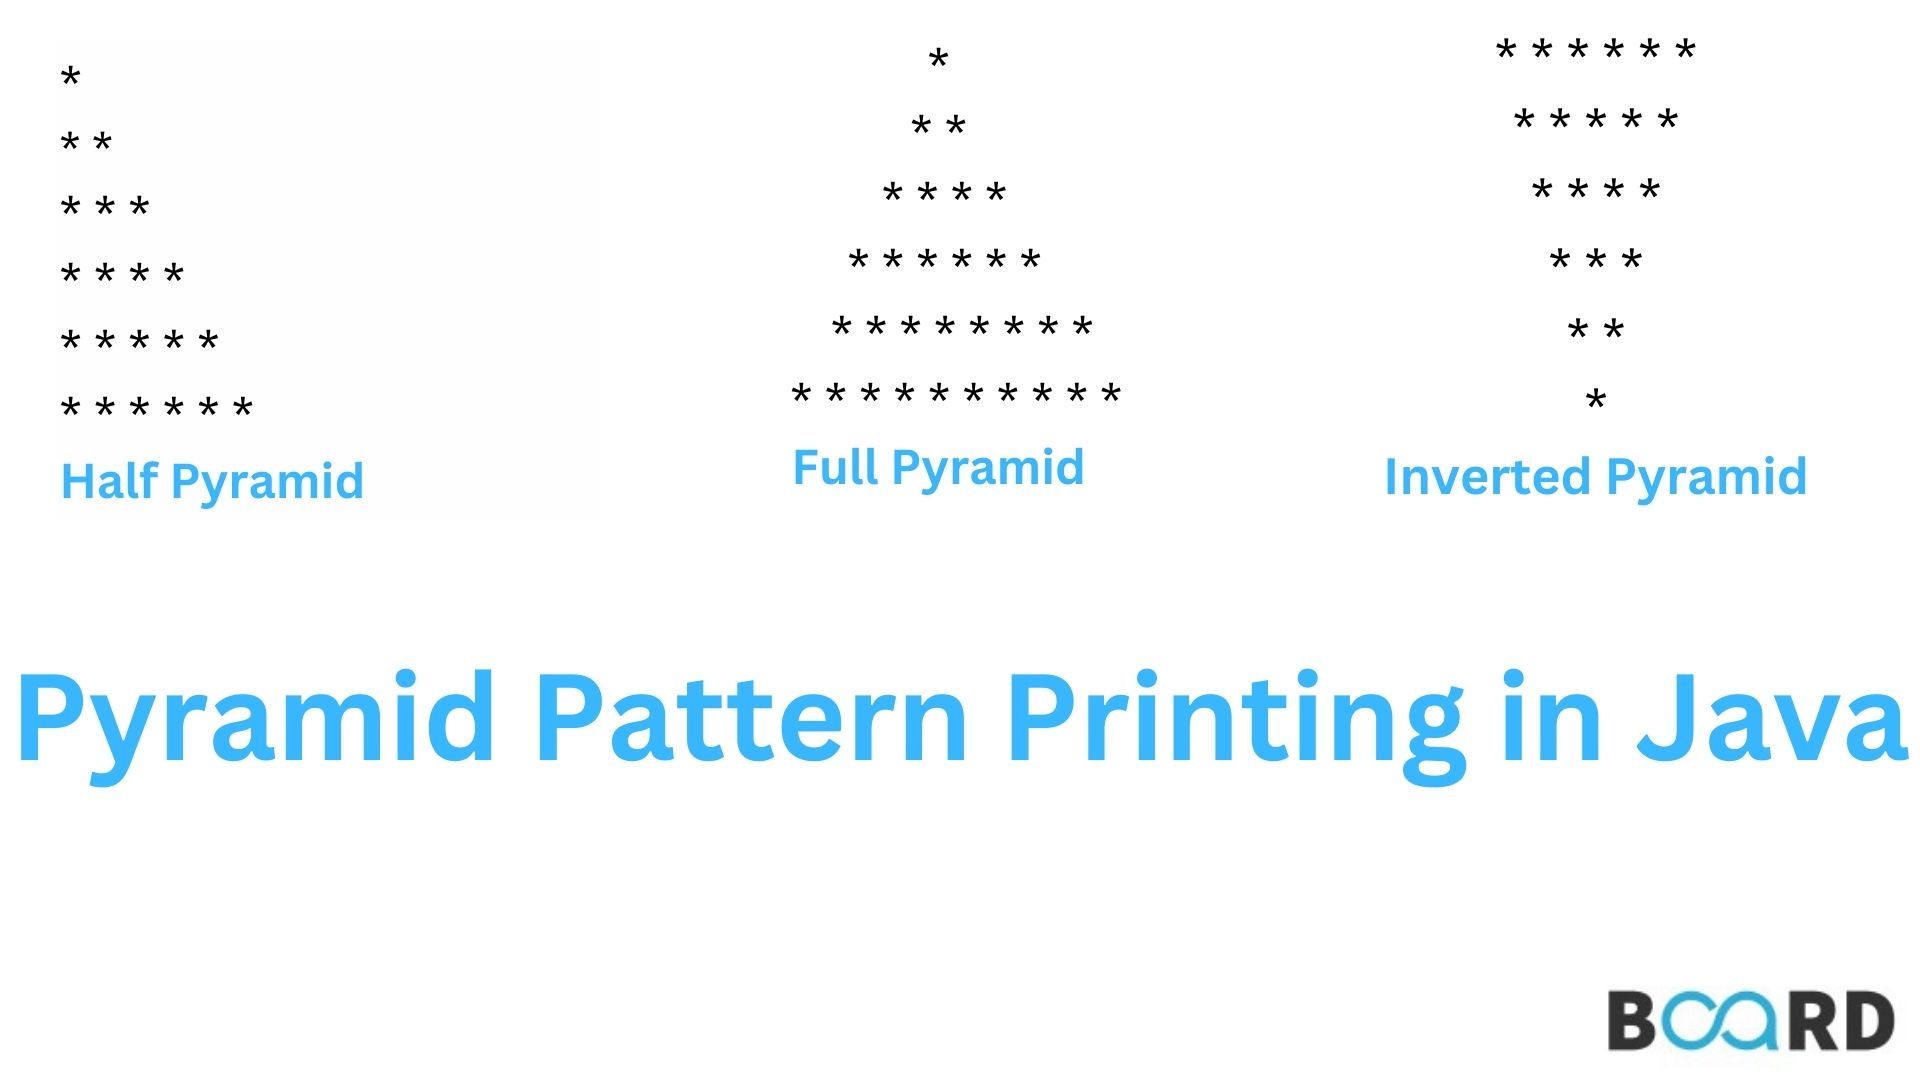 Learn how to do Pyramid Pattern printing in Java